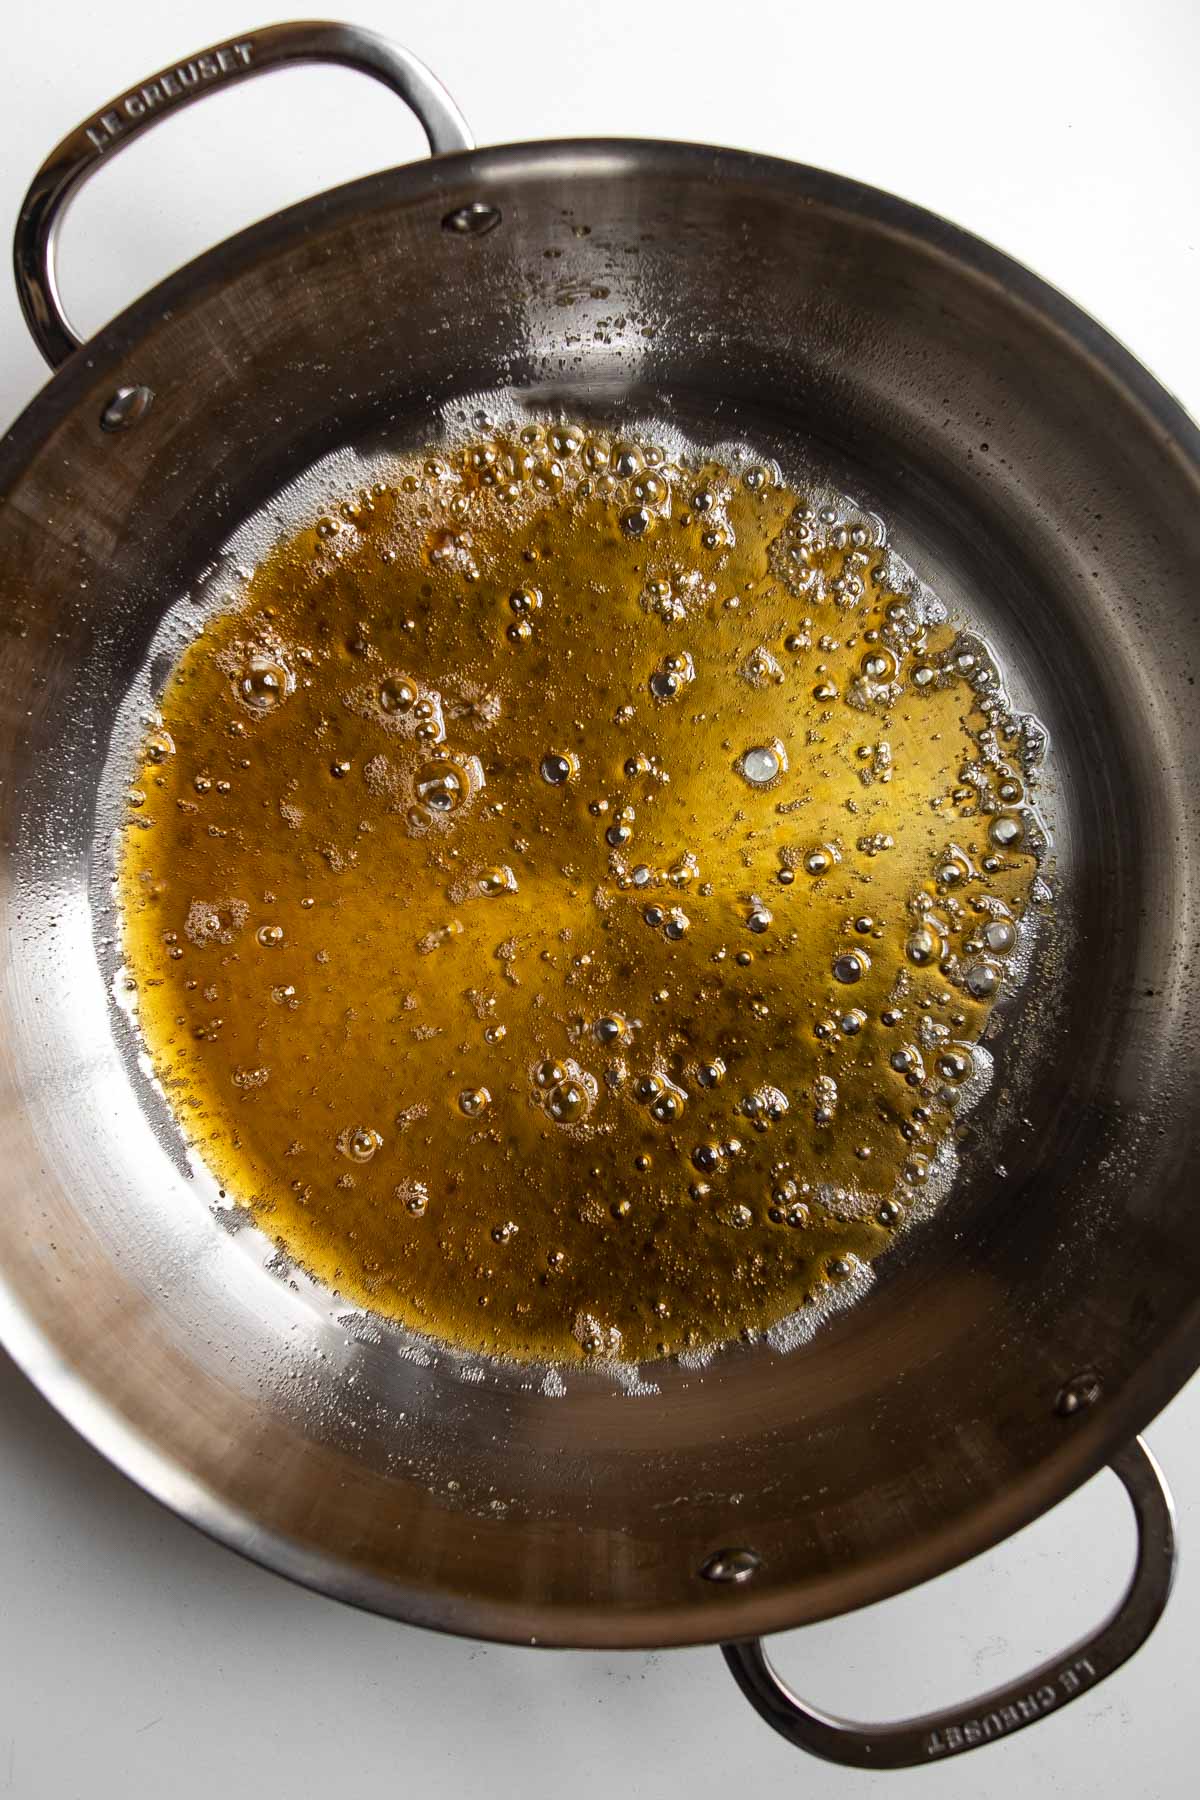 maple syrup boiling in a skillet.